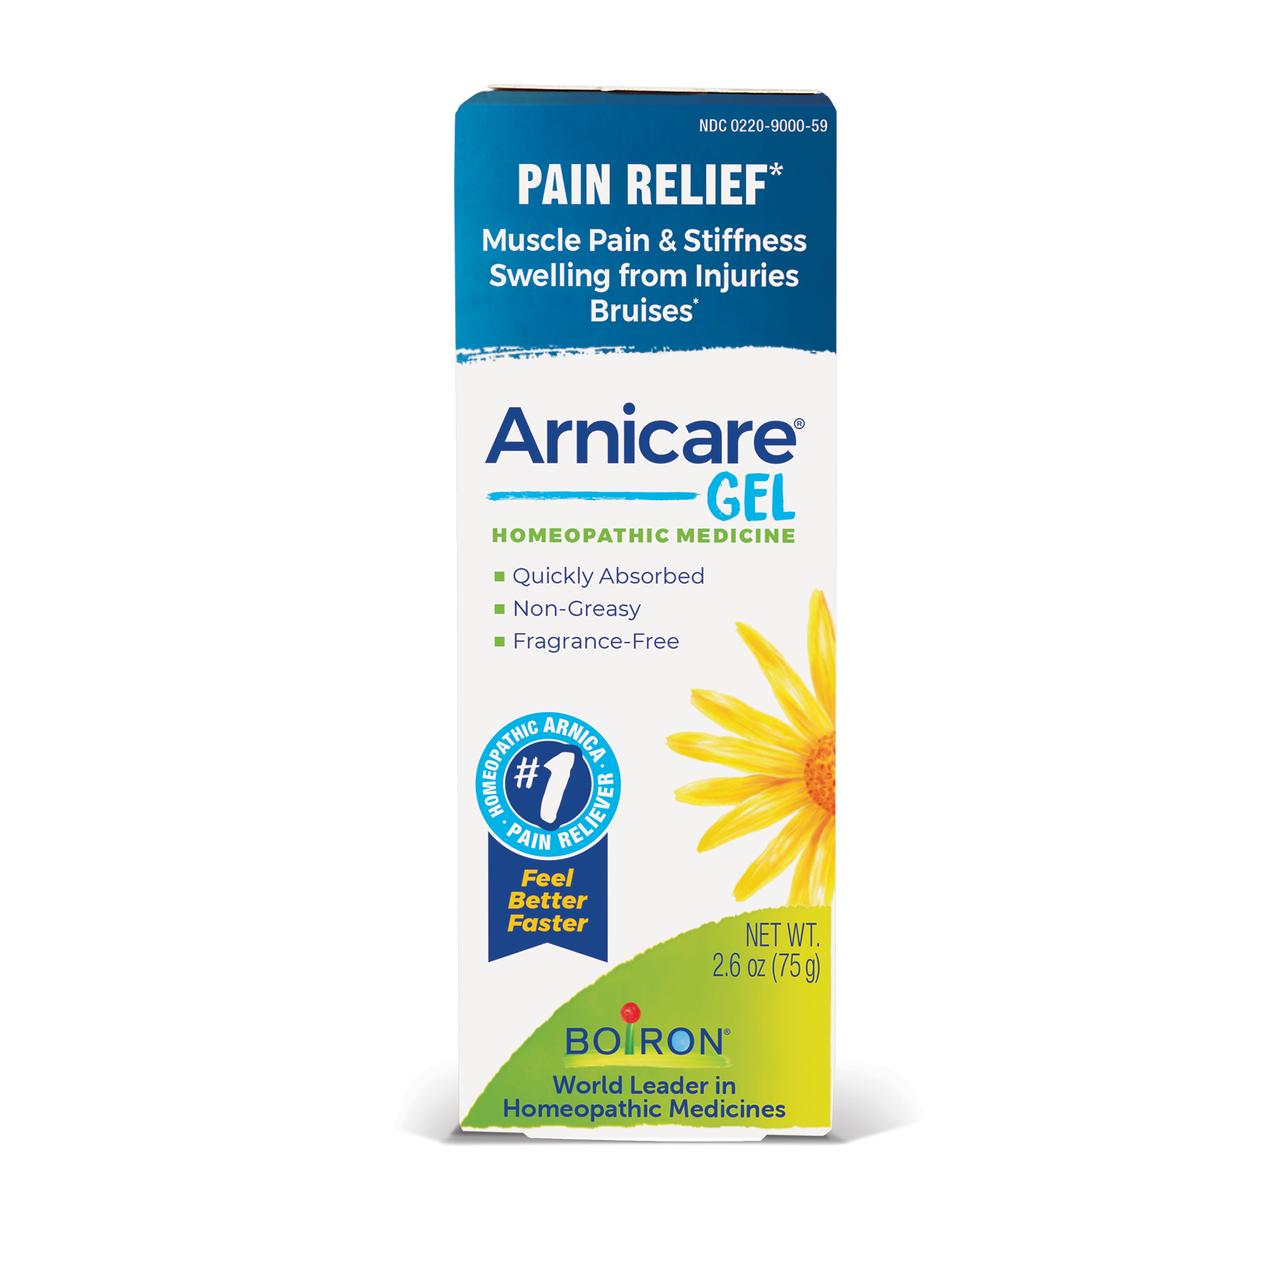 Boiron Arnicare Gel Soothing Relief of Joint Pain, Muscle Pain, Muscle Soreness, and Bruises, 2.6 oz - image 1 of 11